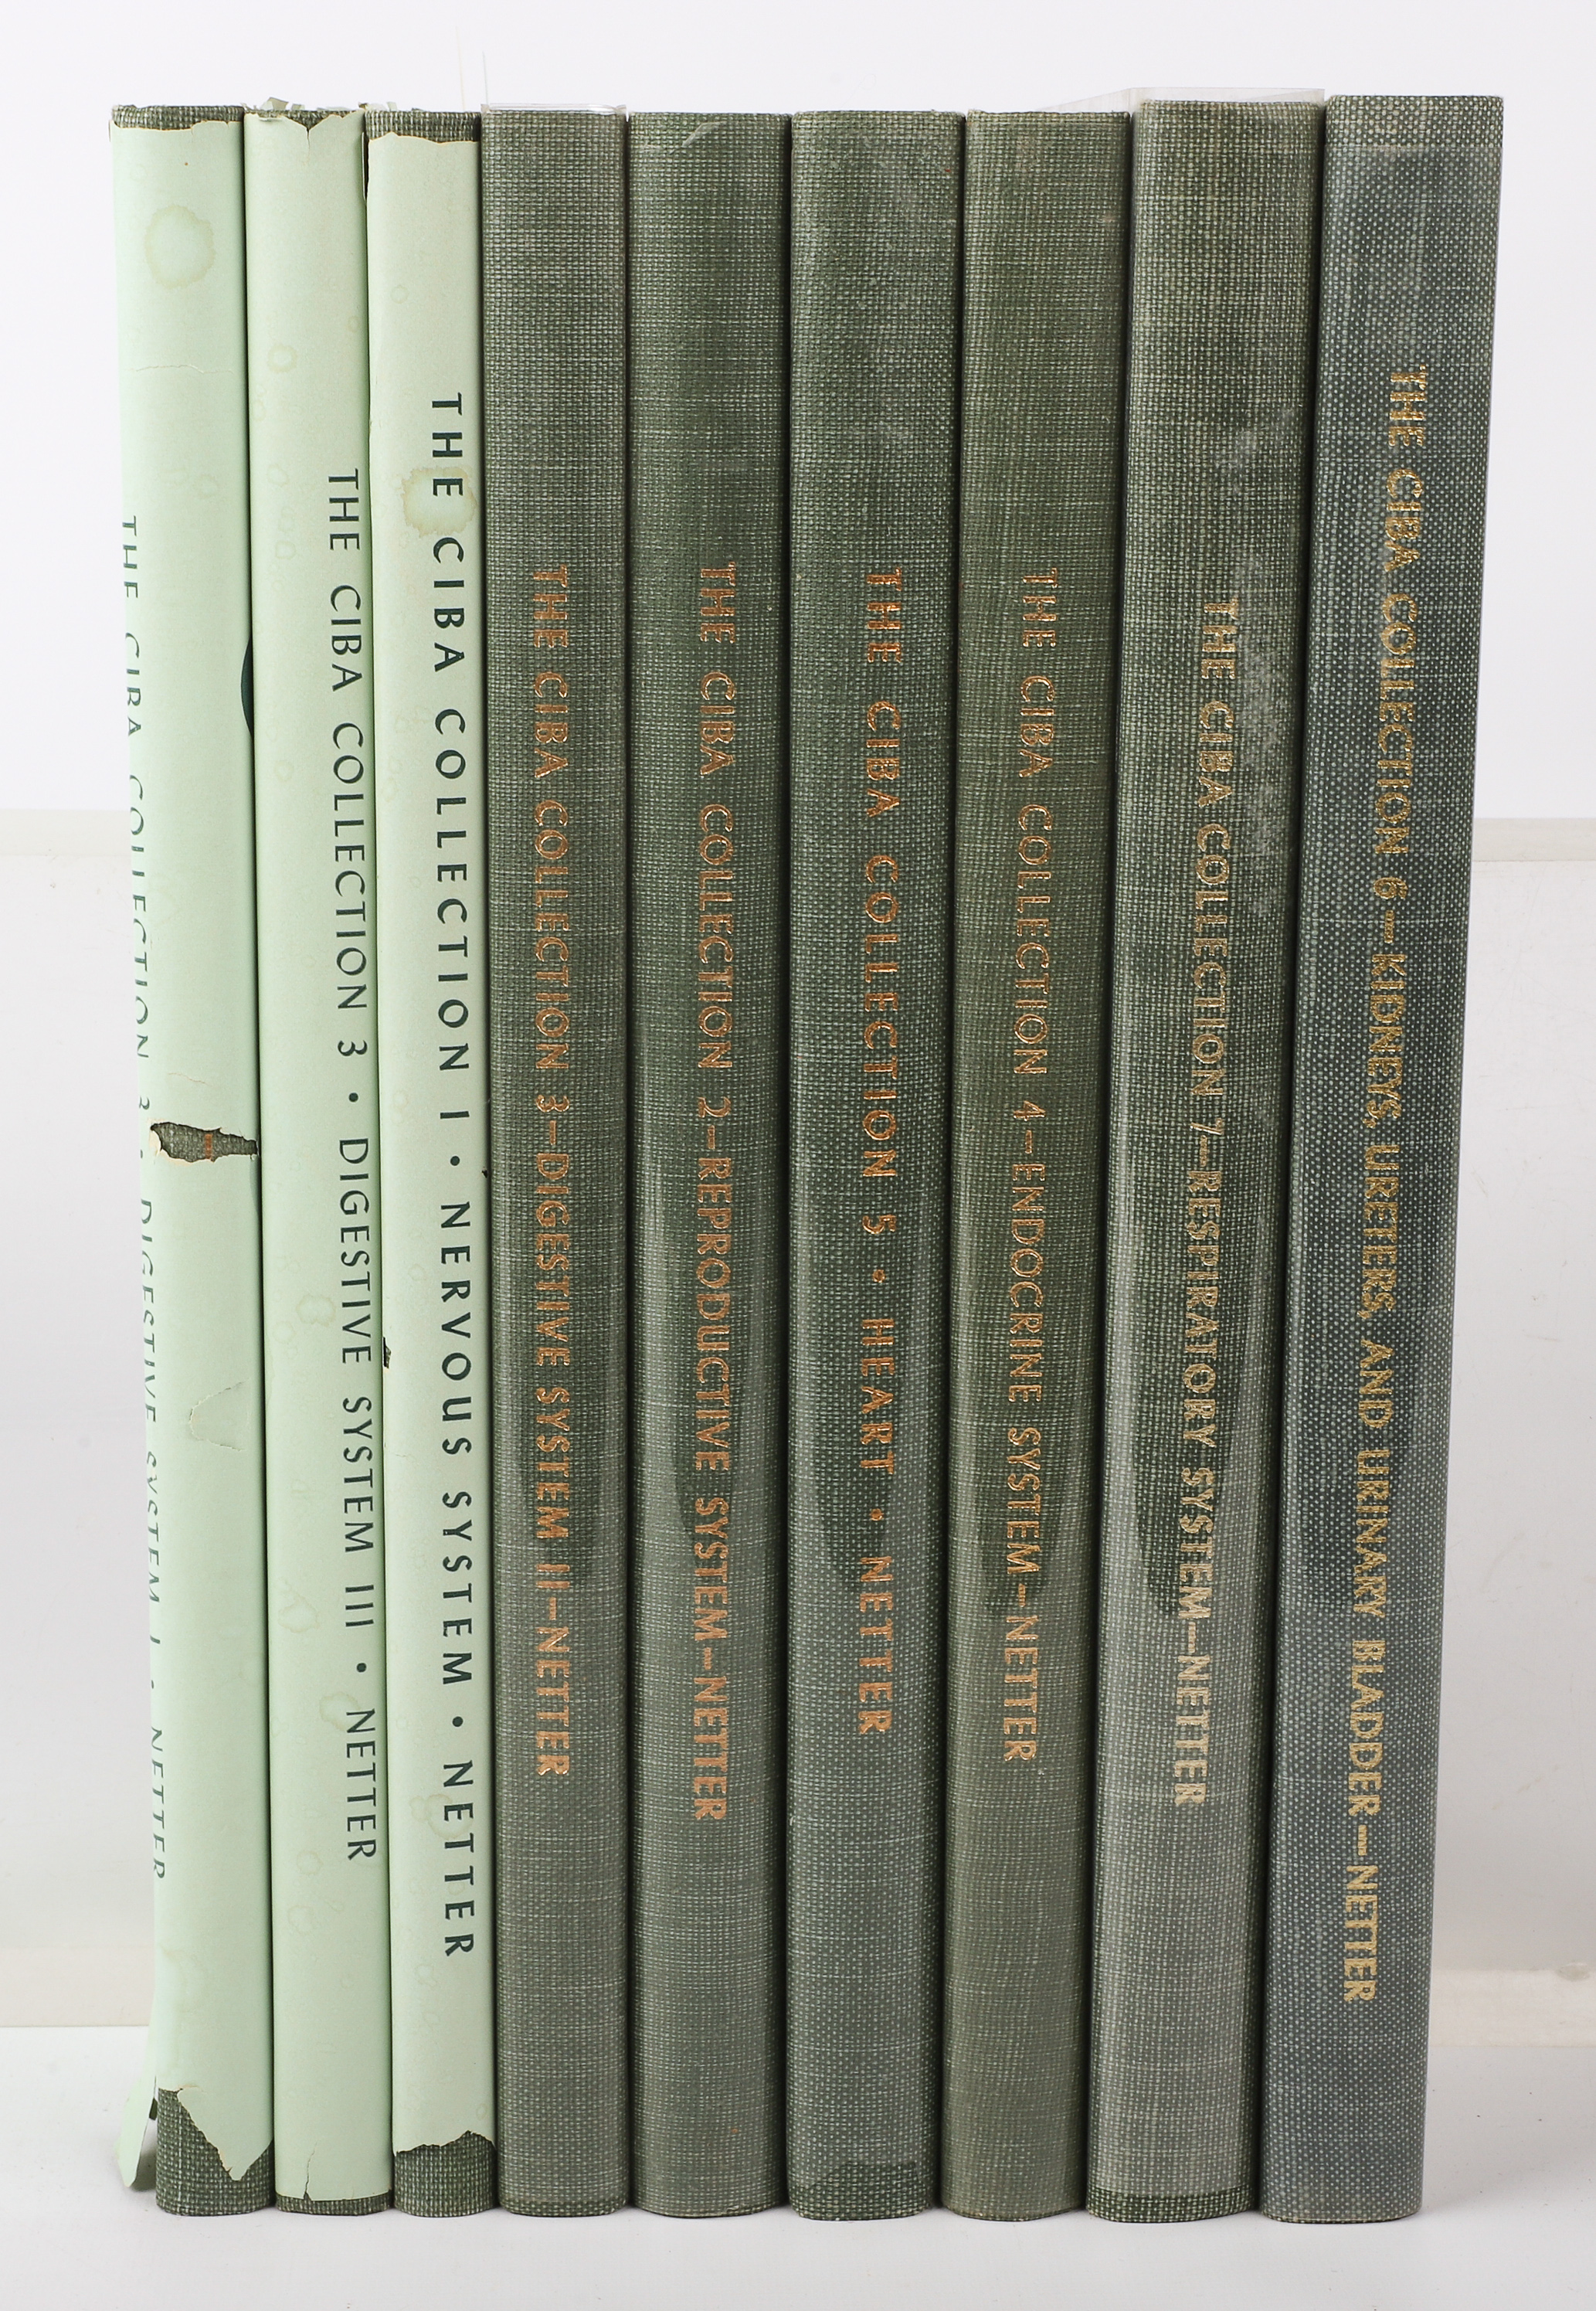 Nine volumes of The Ciba Collection